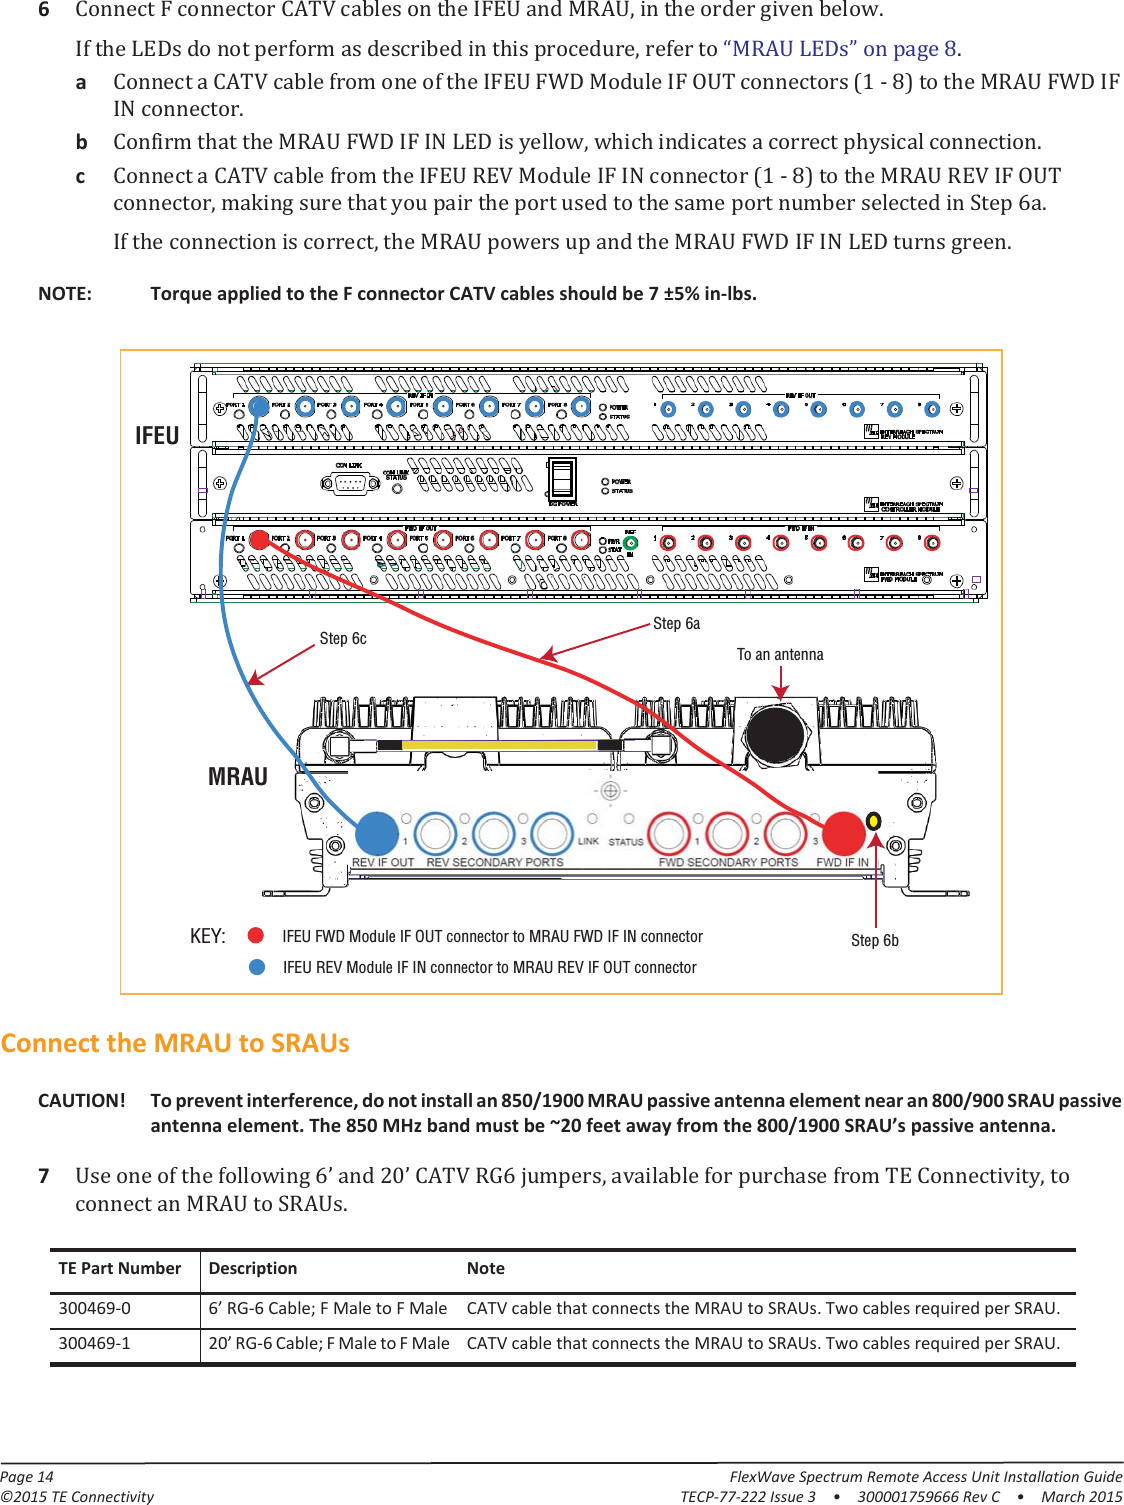 Page 14 FlexWave Spectrum Remote Access Unit Installation Guide©2015 TE Connectivity TECP-77-222 Issue 3  •  300001759666 Rev C  • March 20156Connect F connector CATV cables on the IFEU and MRAU, in the order given below. If the LEDs do not perform as described in this procedure, refer to “MRAU LEDs” on page  8.aConnect a CATV cable from one of the IFEU FWD Module IF OUT connectors (1 - 8) to the MRAU FWD IF IN connector.bConfirm that the MRAU FWD IF IN LED is yellow, which indicates a correct physical connection.cConnect a CATV cable from the IFEU REV Module IF IN connector (1 - 8) to the MRAU REV IF OUT connector, making sure that you pair the port used to the same port number selected in Step 6a.If the connection is correct, the MRAU powers up and the MRAU FWD IF IN LED turns green. Step 6aIFEUREV IF OUT REV  SECONDARY  PORTS   1                 2                 3FWD  SECONDARY  PORTS   1                 2                 3FWD IF INLINK STATUSMRAUTo an antennaStep 6cKEY: IFEU FWD Module IF OUT connector to MRAU FWD IF IN connectorIFEU REV Module IF IN connector to MRAU REV IF OUT connectorStep 6bNOTE: Torque applied to the F connector CATV cables should be 7 ±5% in-lbs.Connect the MRAU to SRAUsCAUTION! To prevent interference, do not install an 850/1900 MRAU passive antenna element near an 800/900 SRAU passive antenna element. The 850 MHz band must be ~20 feet away from the 800/1900 SRAU’s passive antenna.7Use one of the following 6’ and 20’ CATV RG6 jumpers, available for purchase from TE Connectivity, to connect an MRAU to SRAUs.TE Part Number Description Note300469-0 6’ RG-6 Cable; F Male to F Male CATV cable that connects the MRAU to SRAUs. Two cables required per SRAU.300469-1 20’ RG-6 Cable; F Male to F Male CATV cable that connects the MRAU to SRAUs. Two cables required per SRAU.